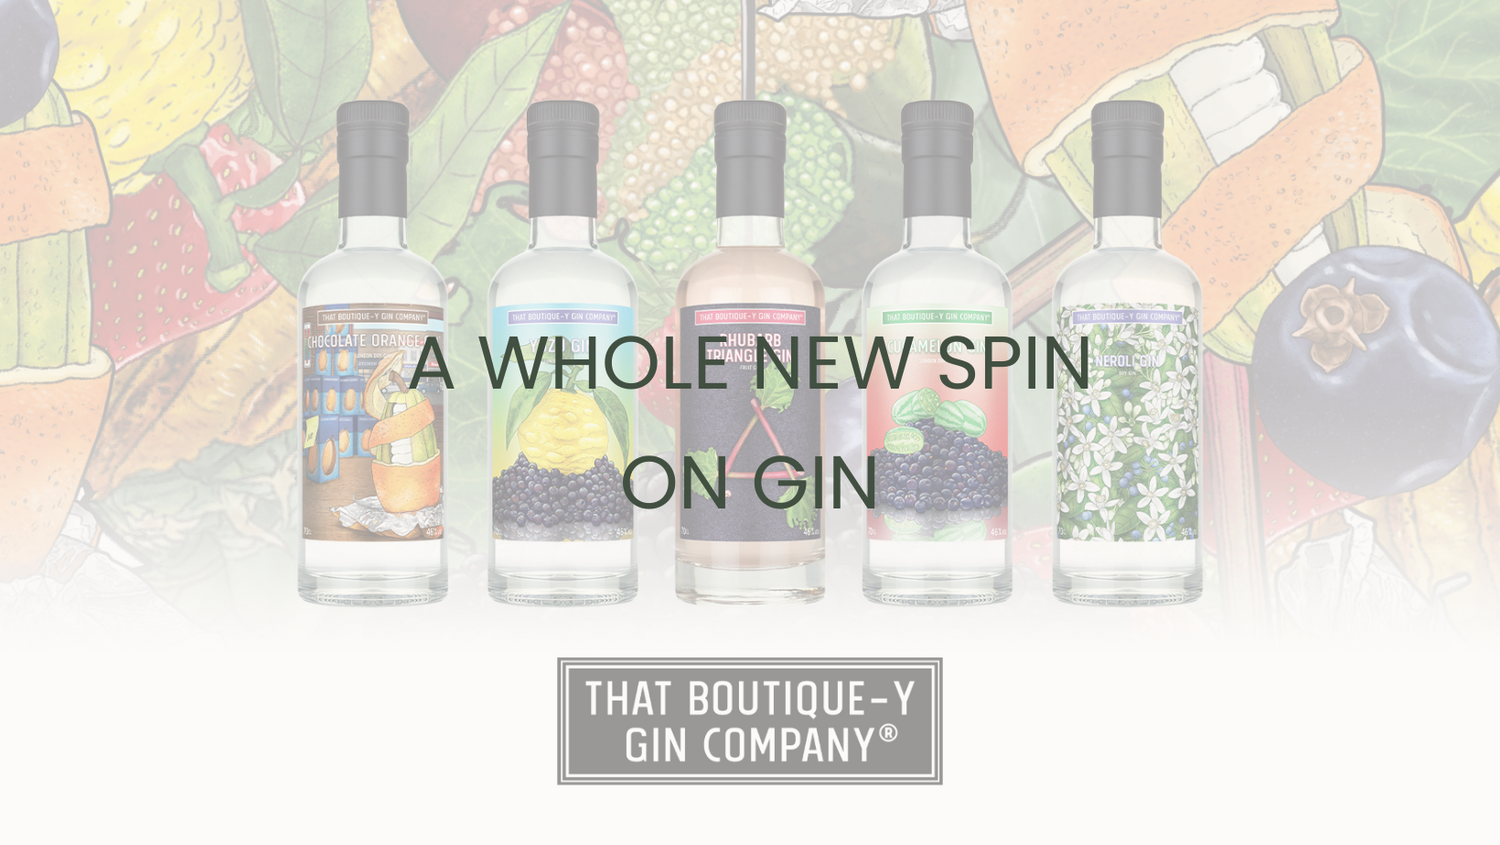 A Whole New Spin on Gin